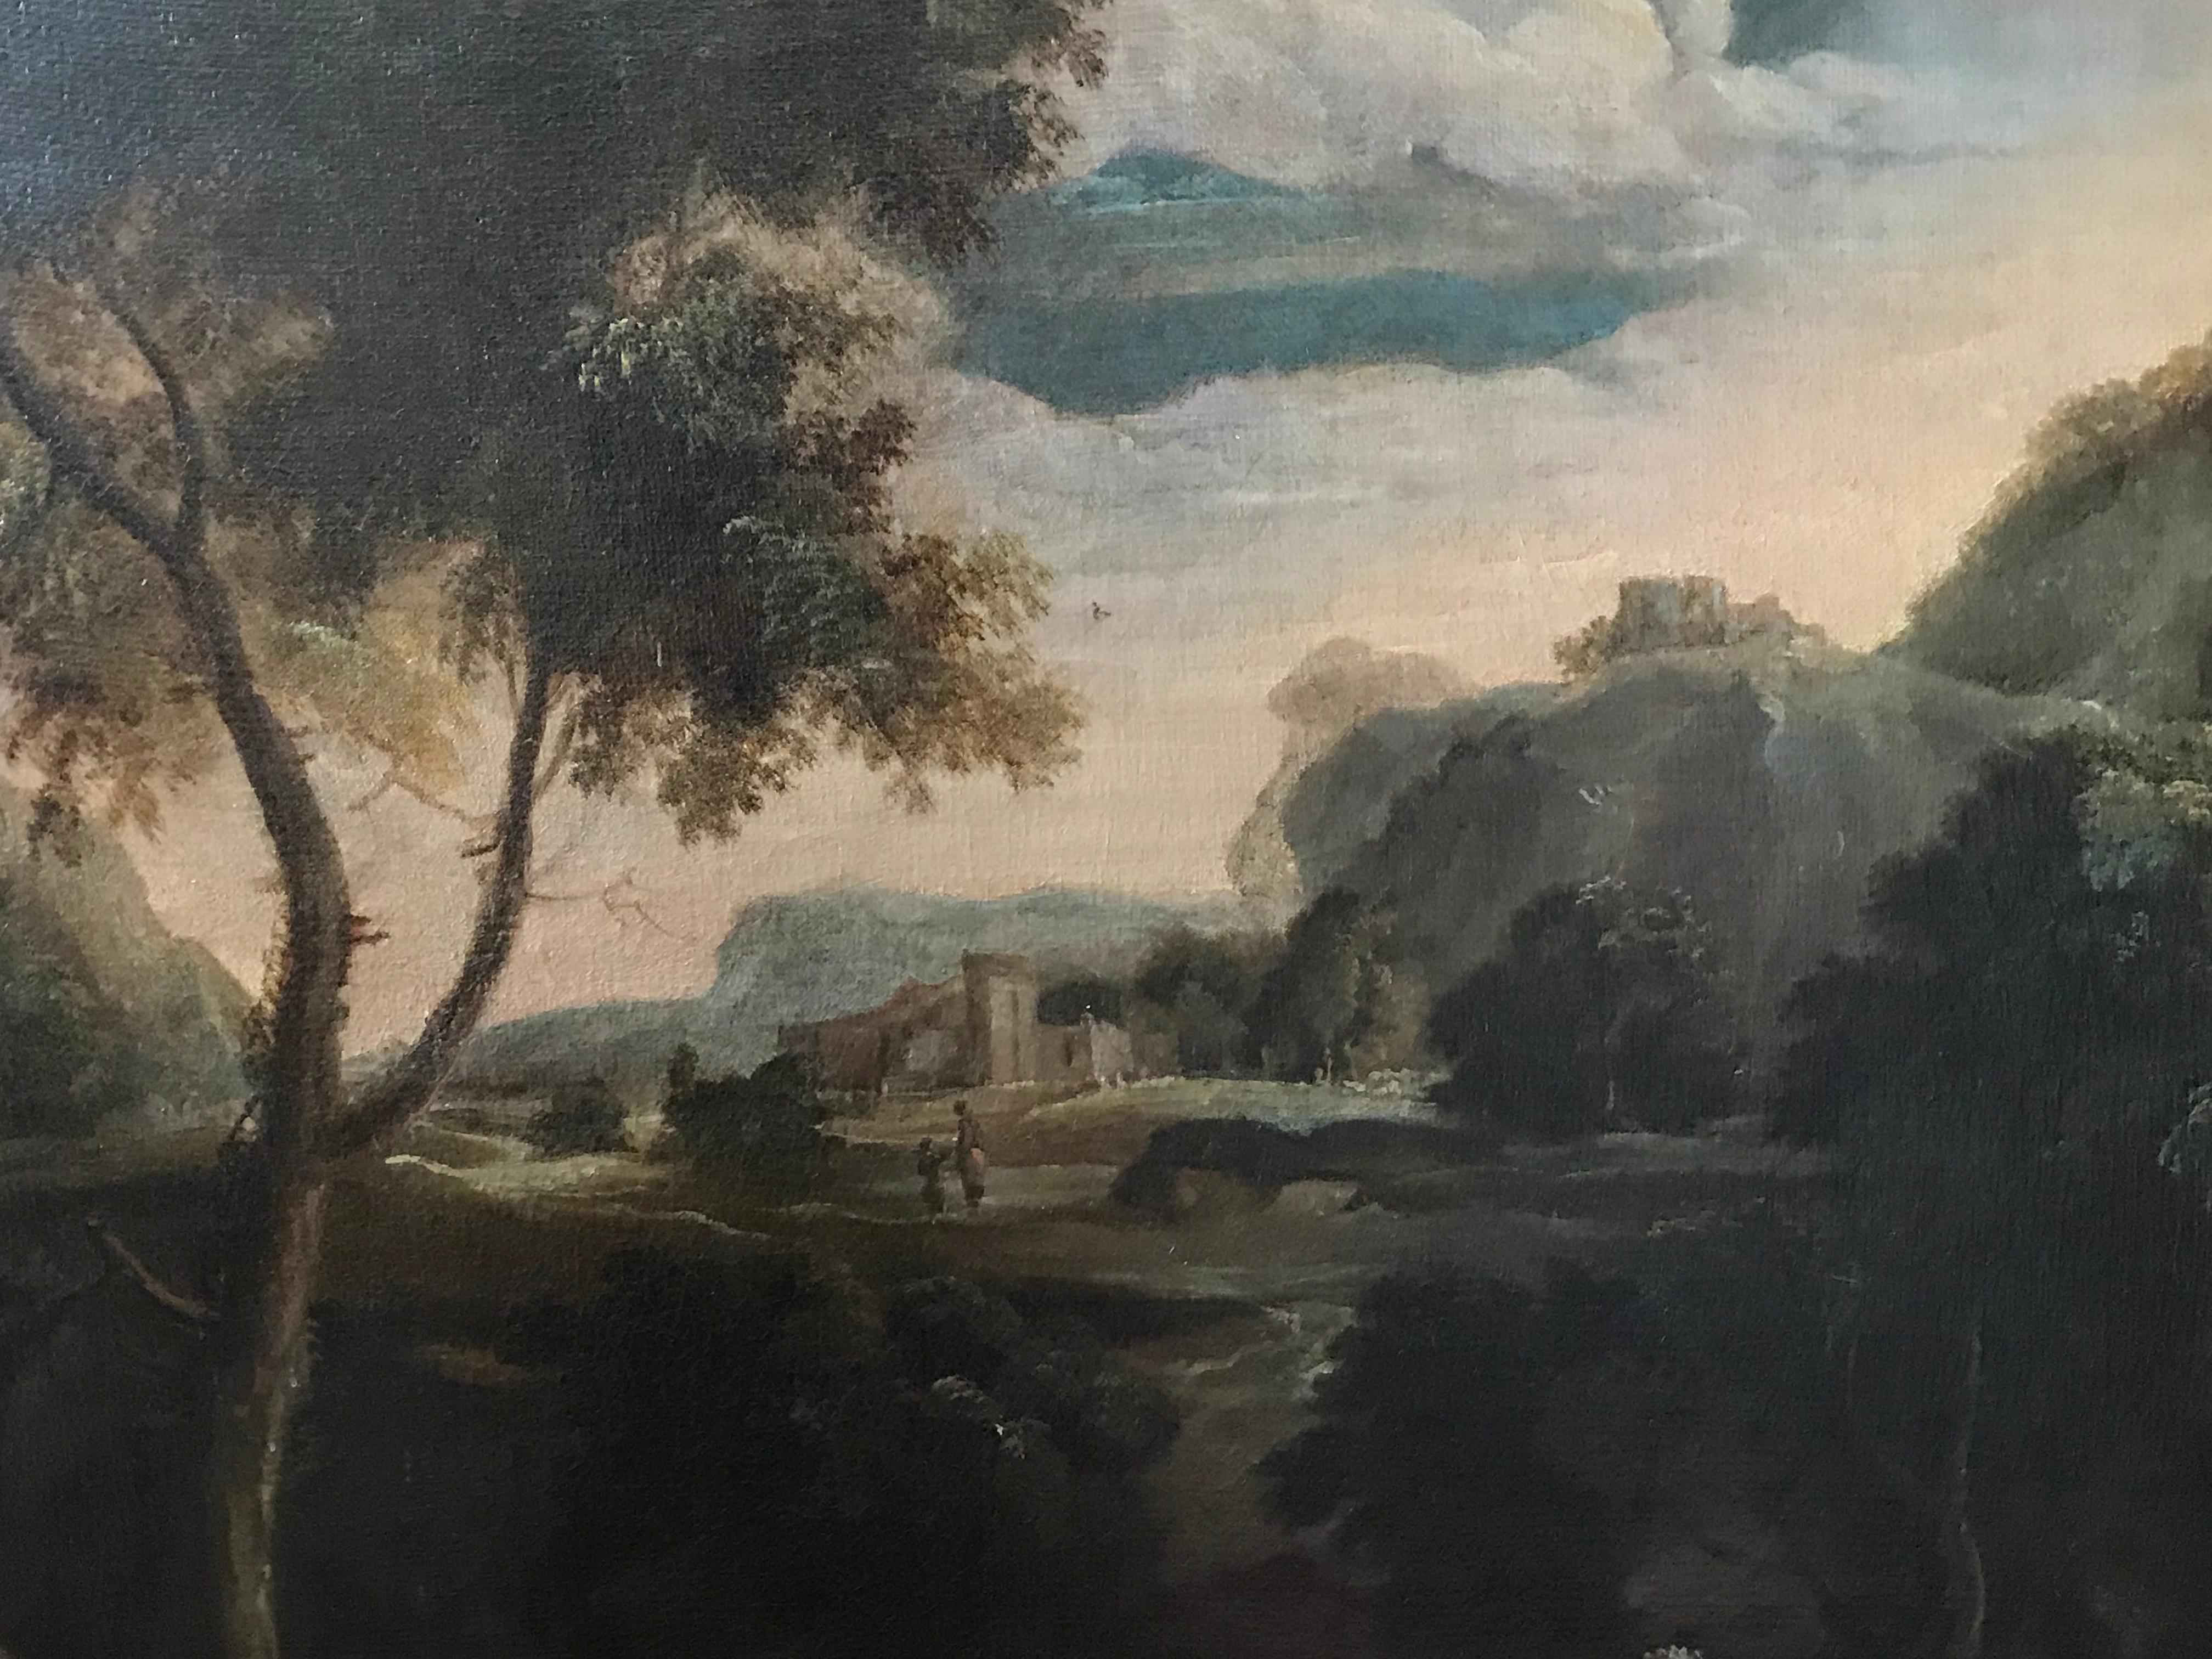 Arcadian Landscape with Figures
Venetian School, circa 1740
oil painting on canvas, framed
framed measurements: 29 x 35 inches
provenance: private collection, Gloucestershire, UK

Very fine large scale early 18th century Italian Old Master oil